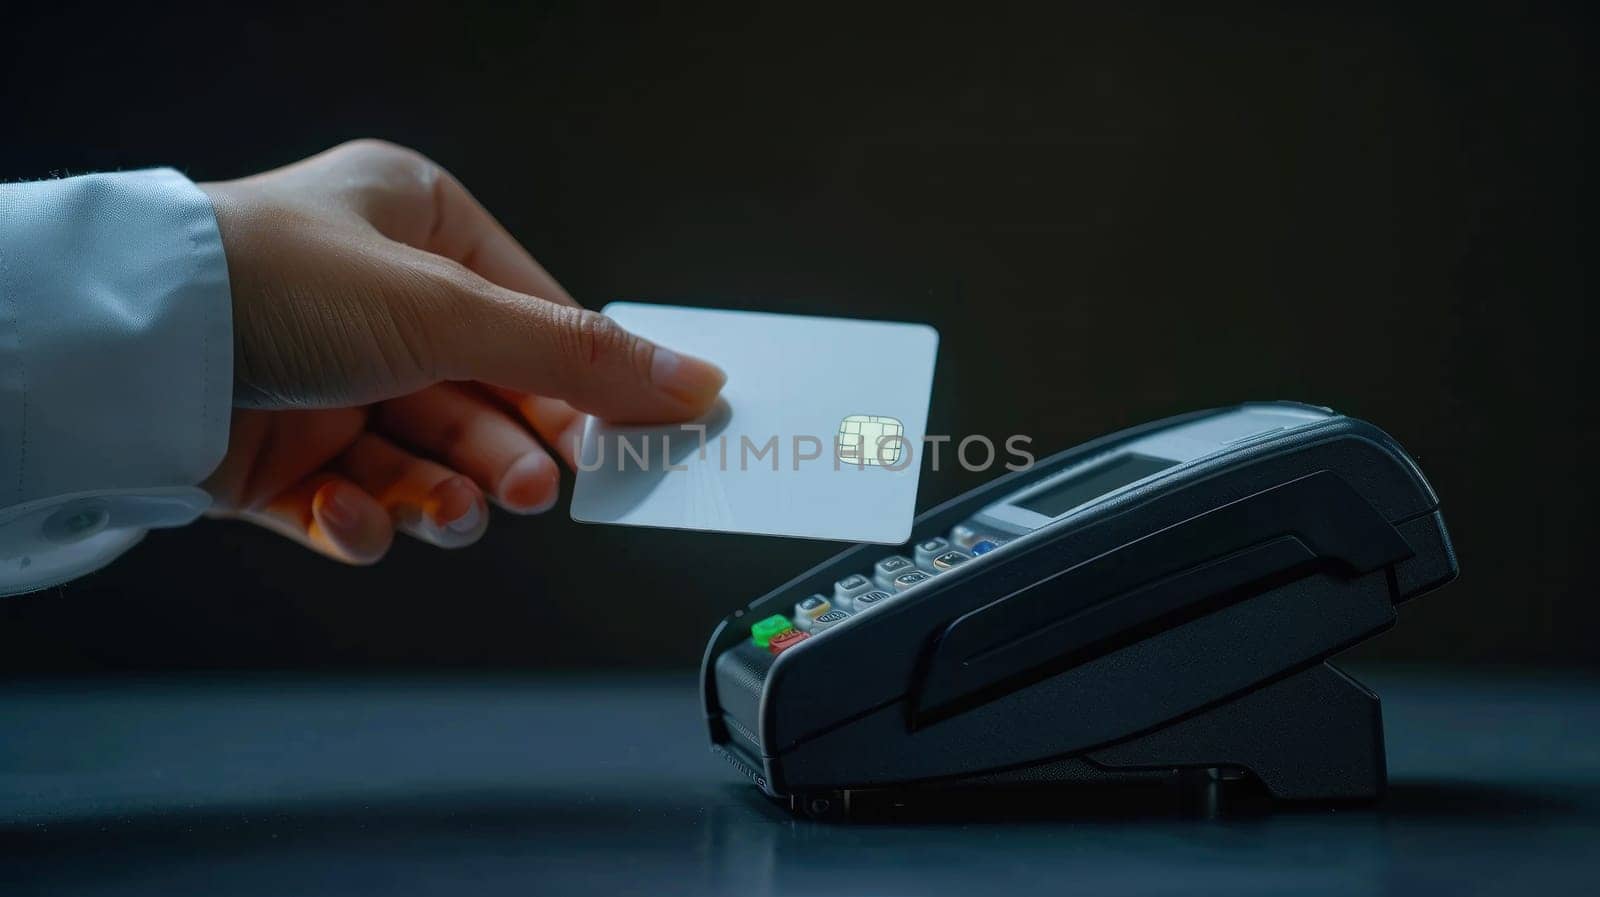 A Hand inserting credit card into payment terminal.